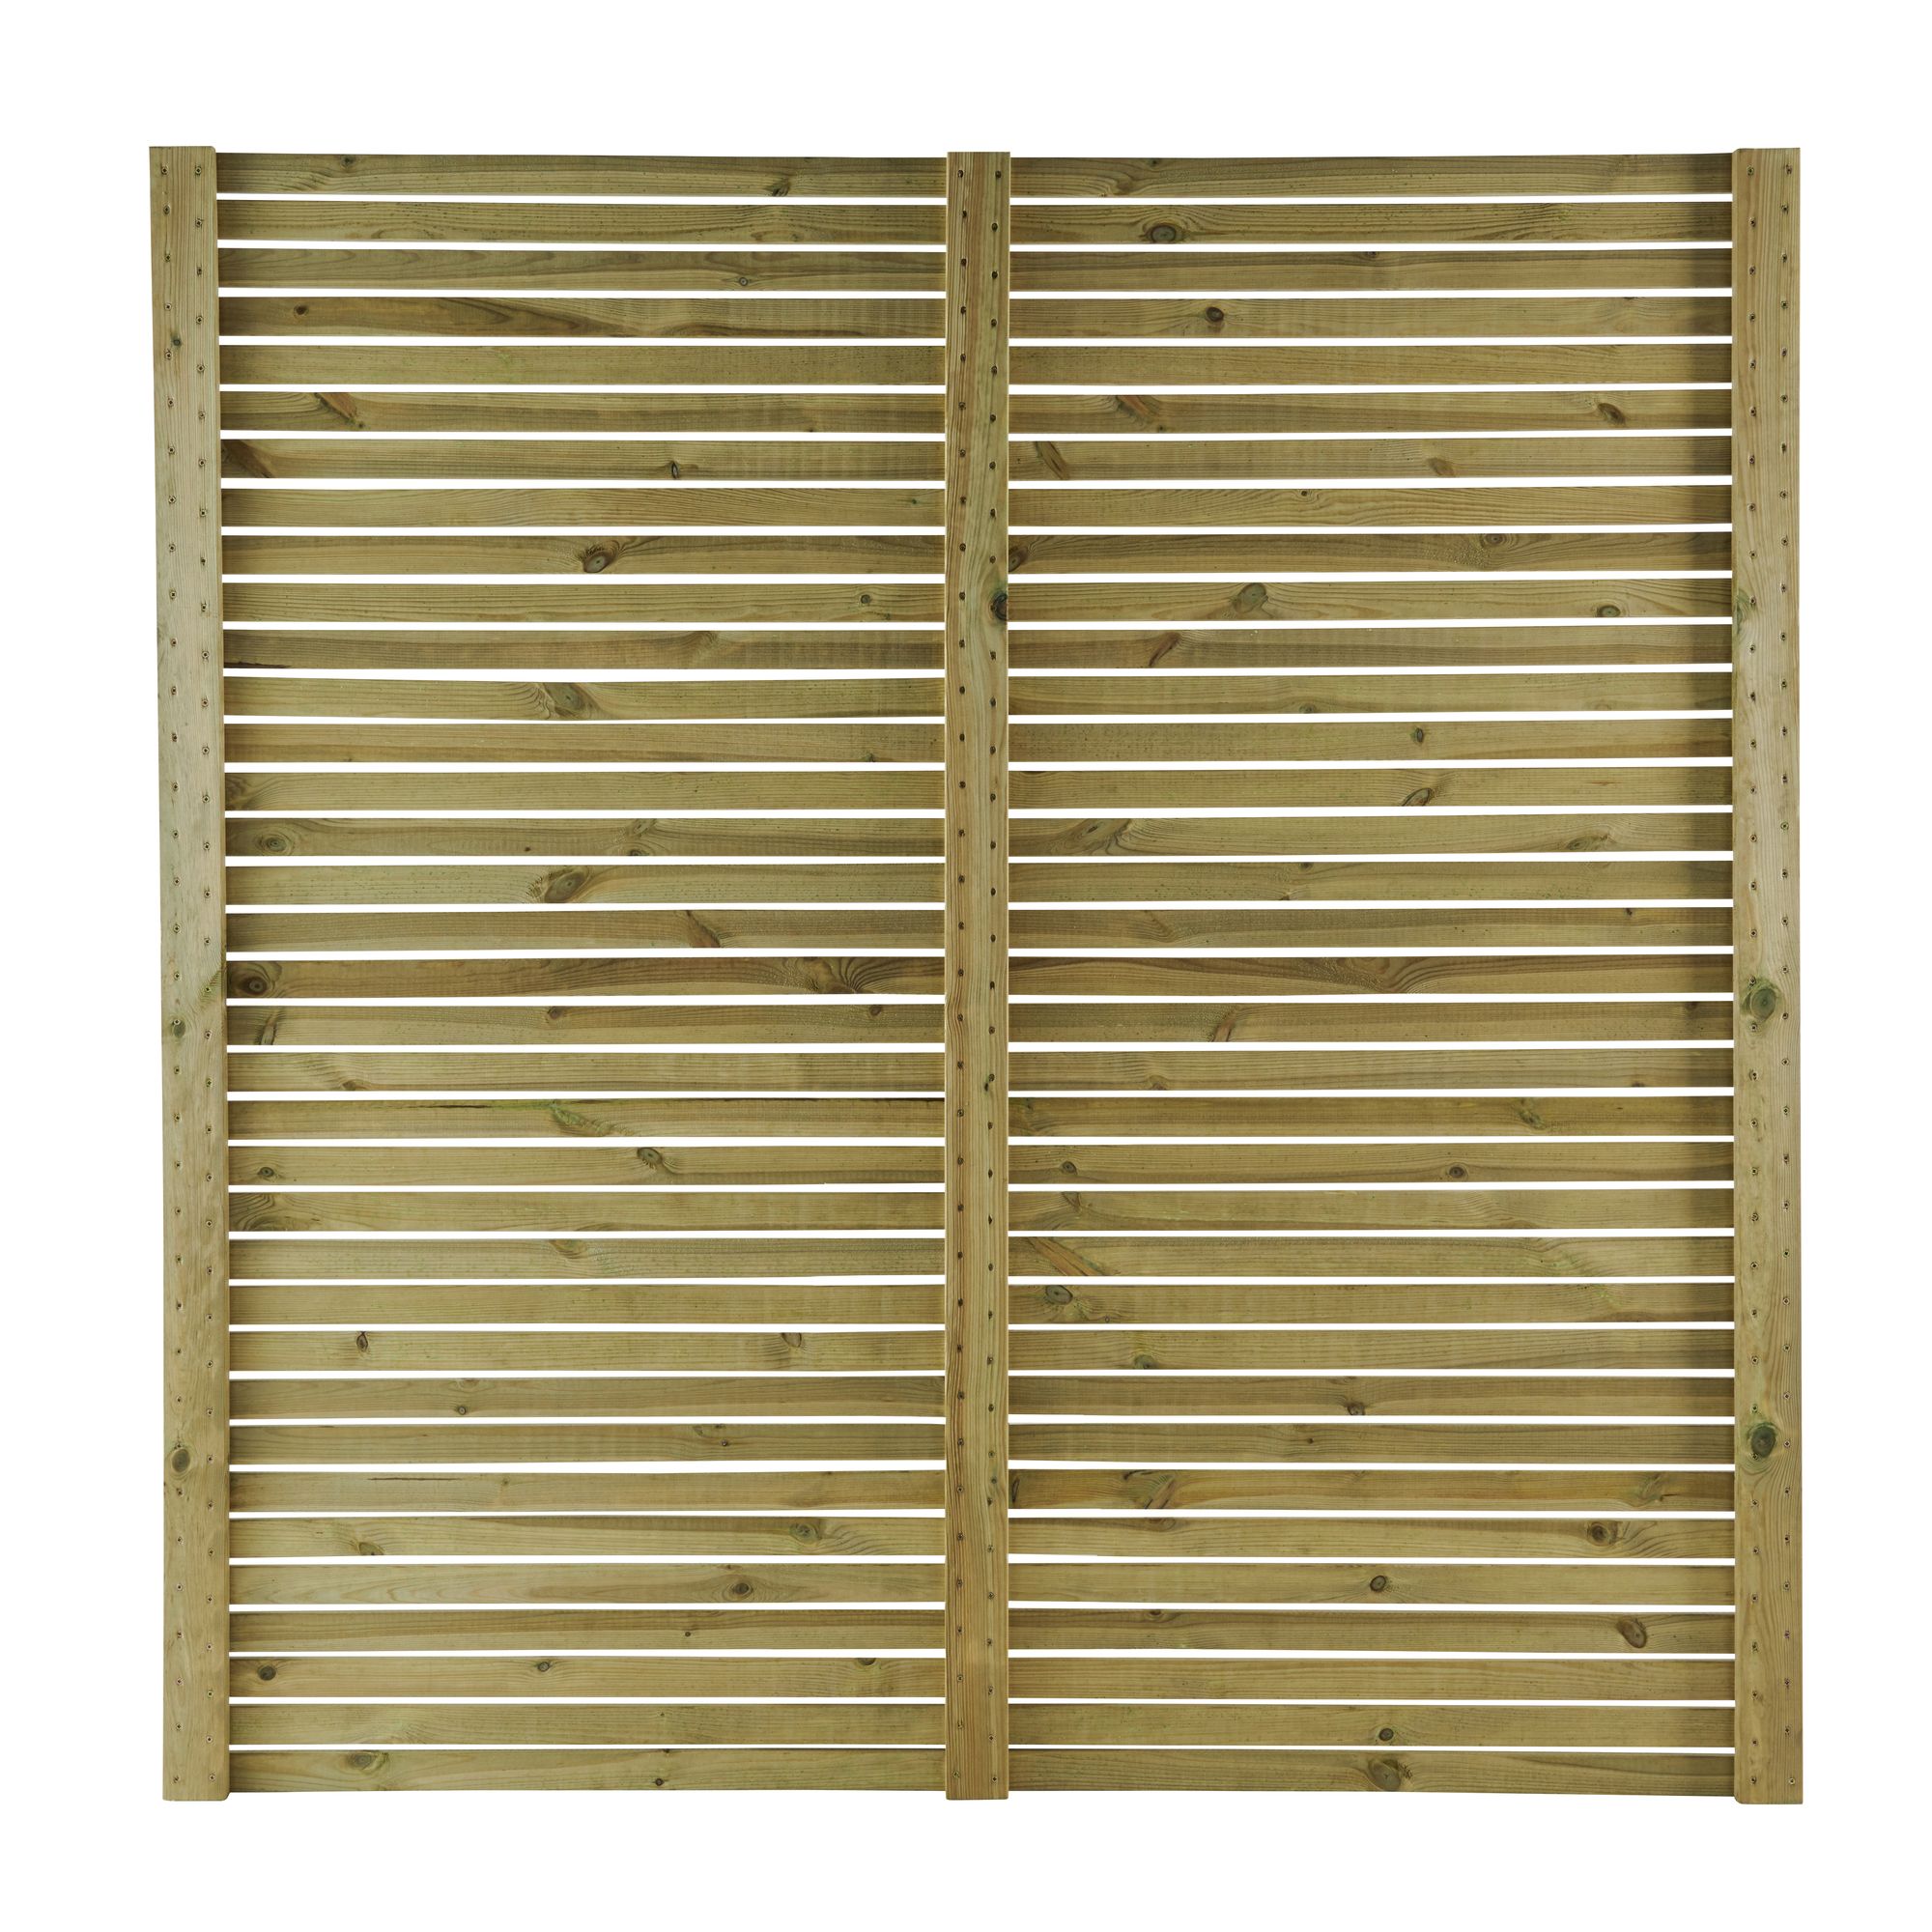 Klikstrom Lemhi Contemporary Closeboard Autoclave & pressure treated Green Wooden Fence panel (W)1.8m (H)1.8m